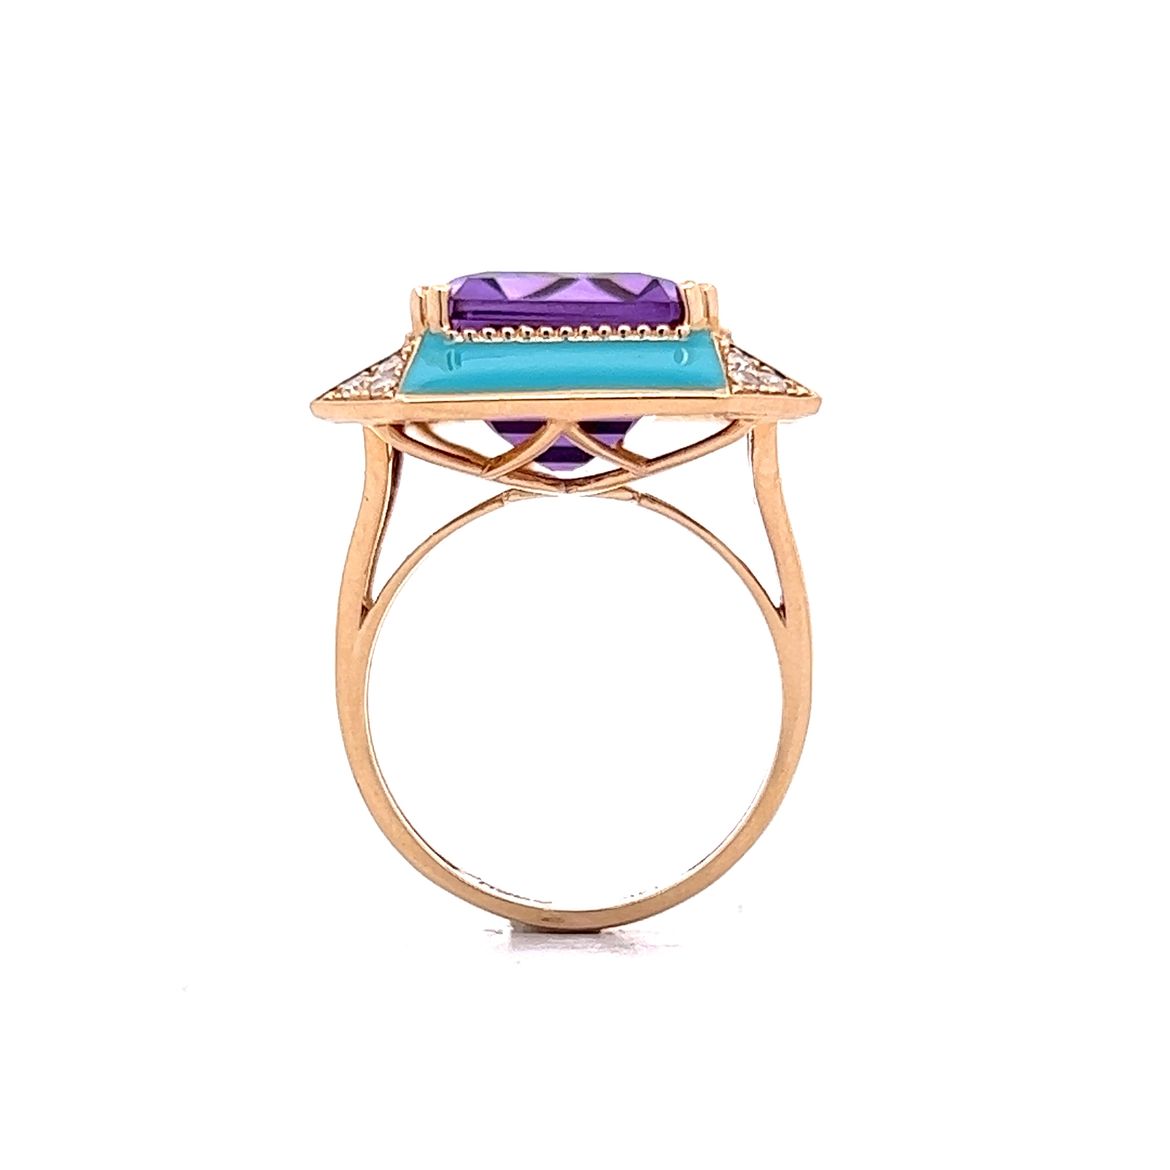 11.80 Emerald Cut Amethyst Cocktail Ring in 14k Yellow Gold